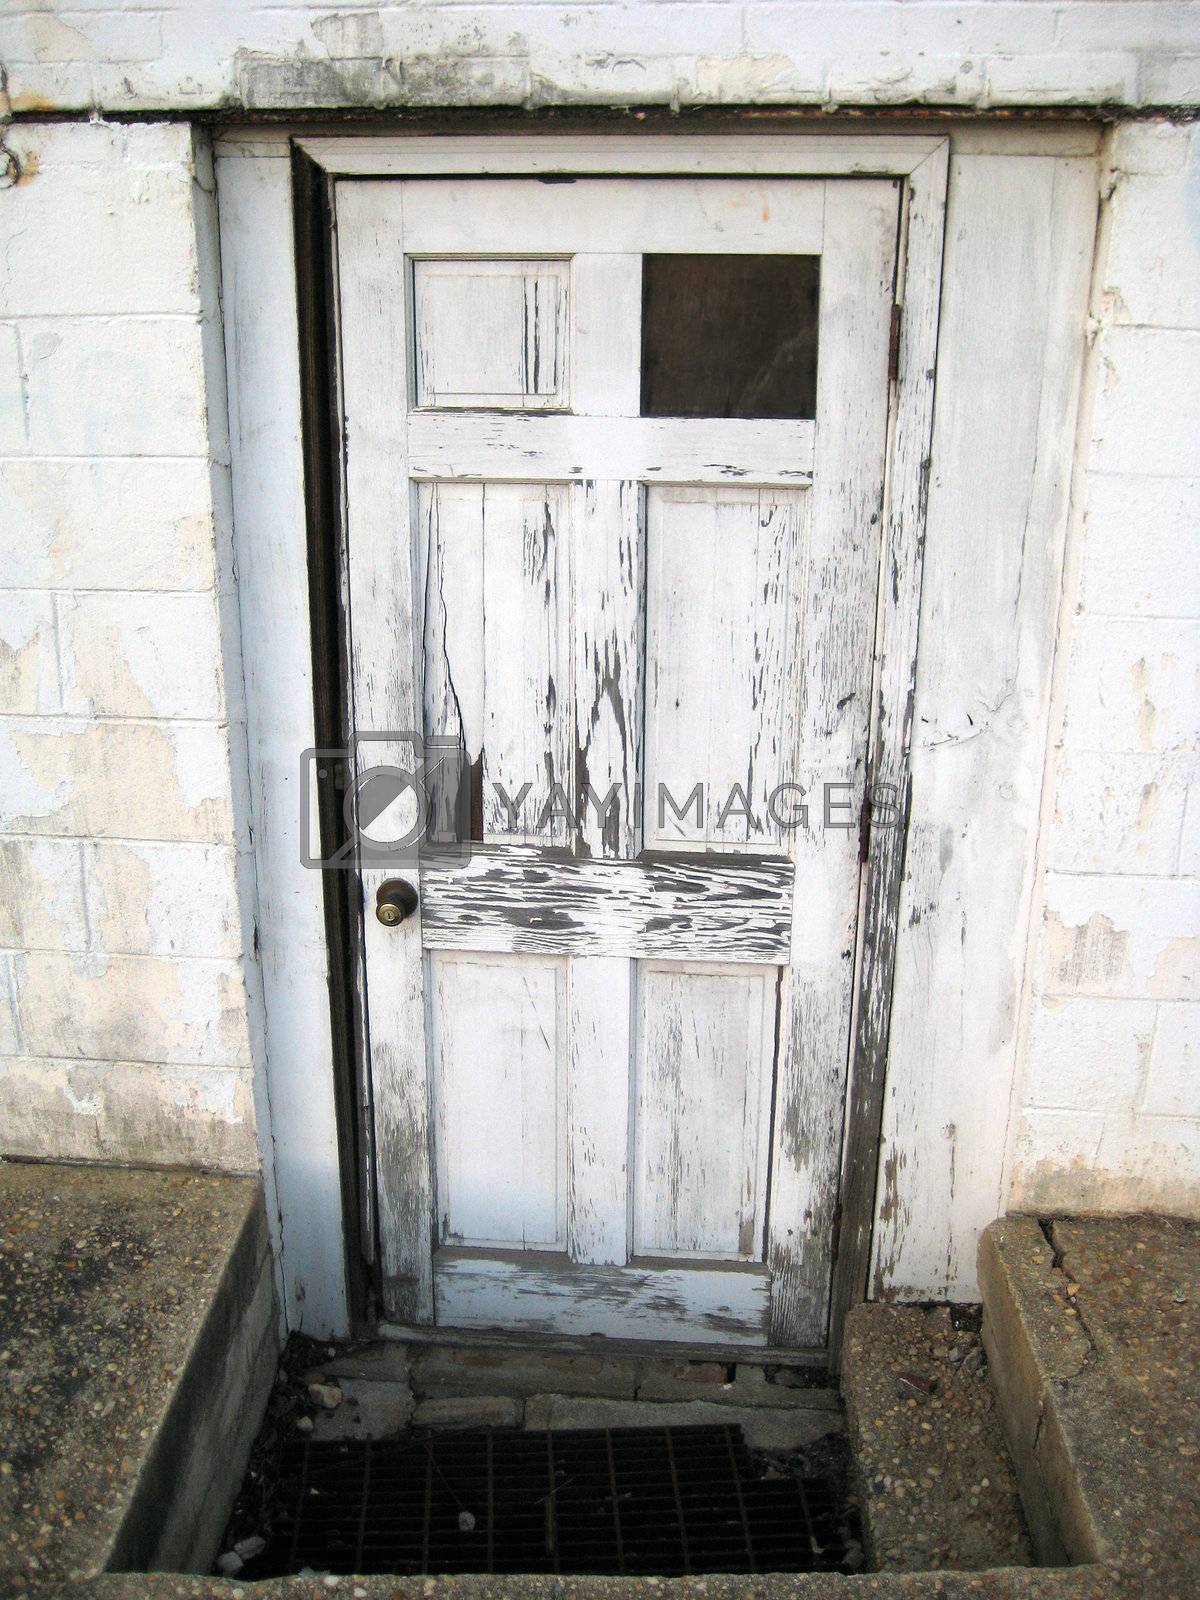 Royalty free image of Old Beaten Up Doorway by jclardy